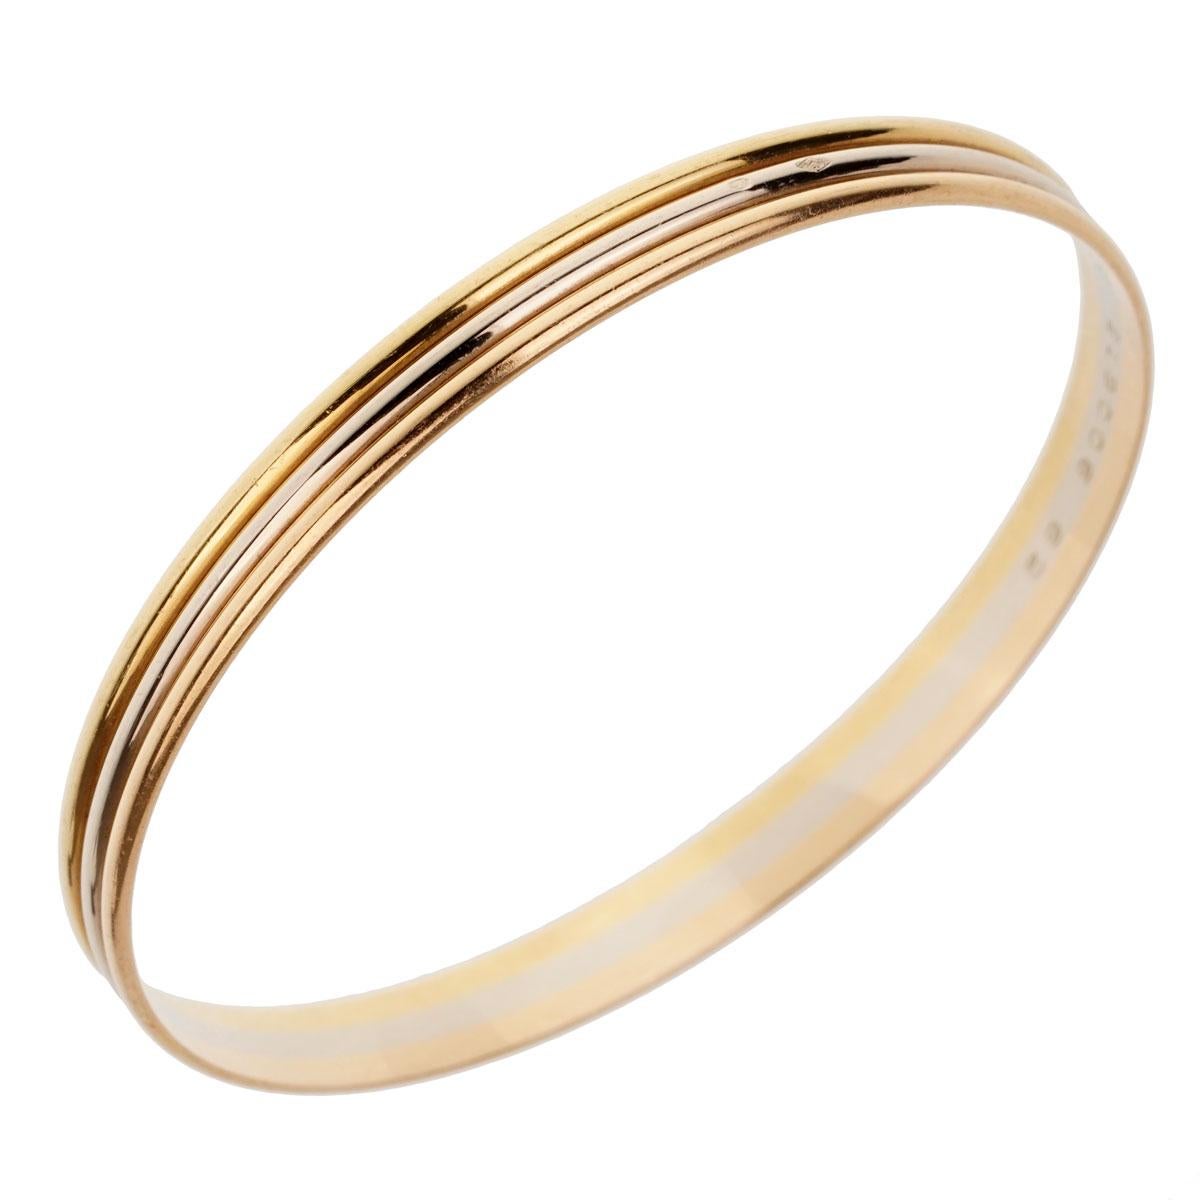 An iconic Cartier trinity slip on bangle in 18k yellow, rose and white gold.